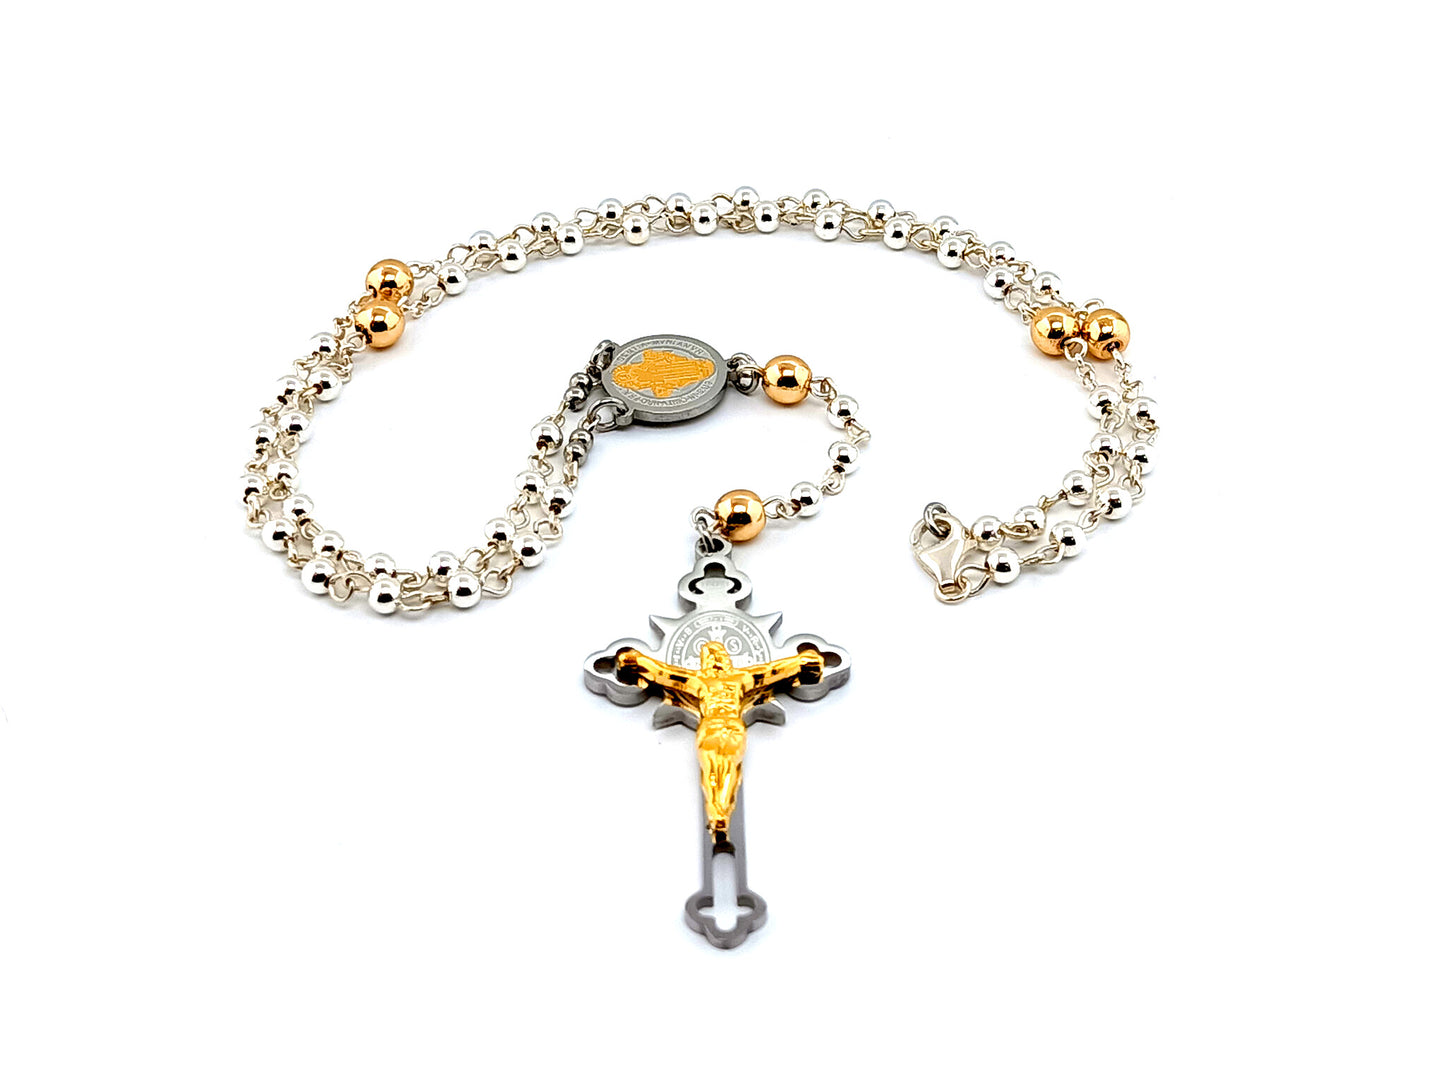 Saint Benedict unique rosary beads with sterling silver and hematite gemstone beads and engraved stainless steel crucifix.